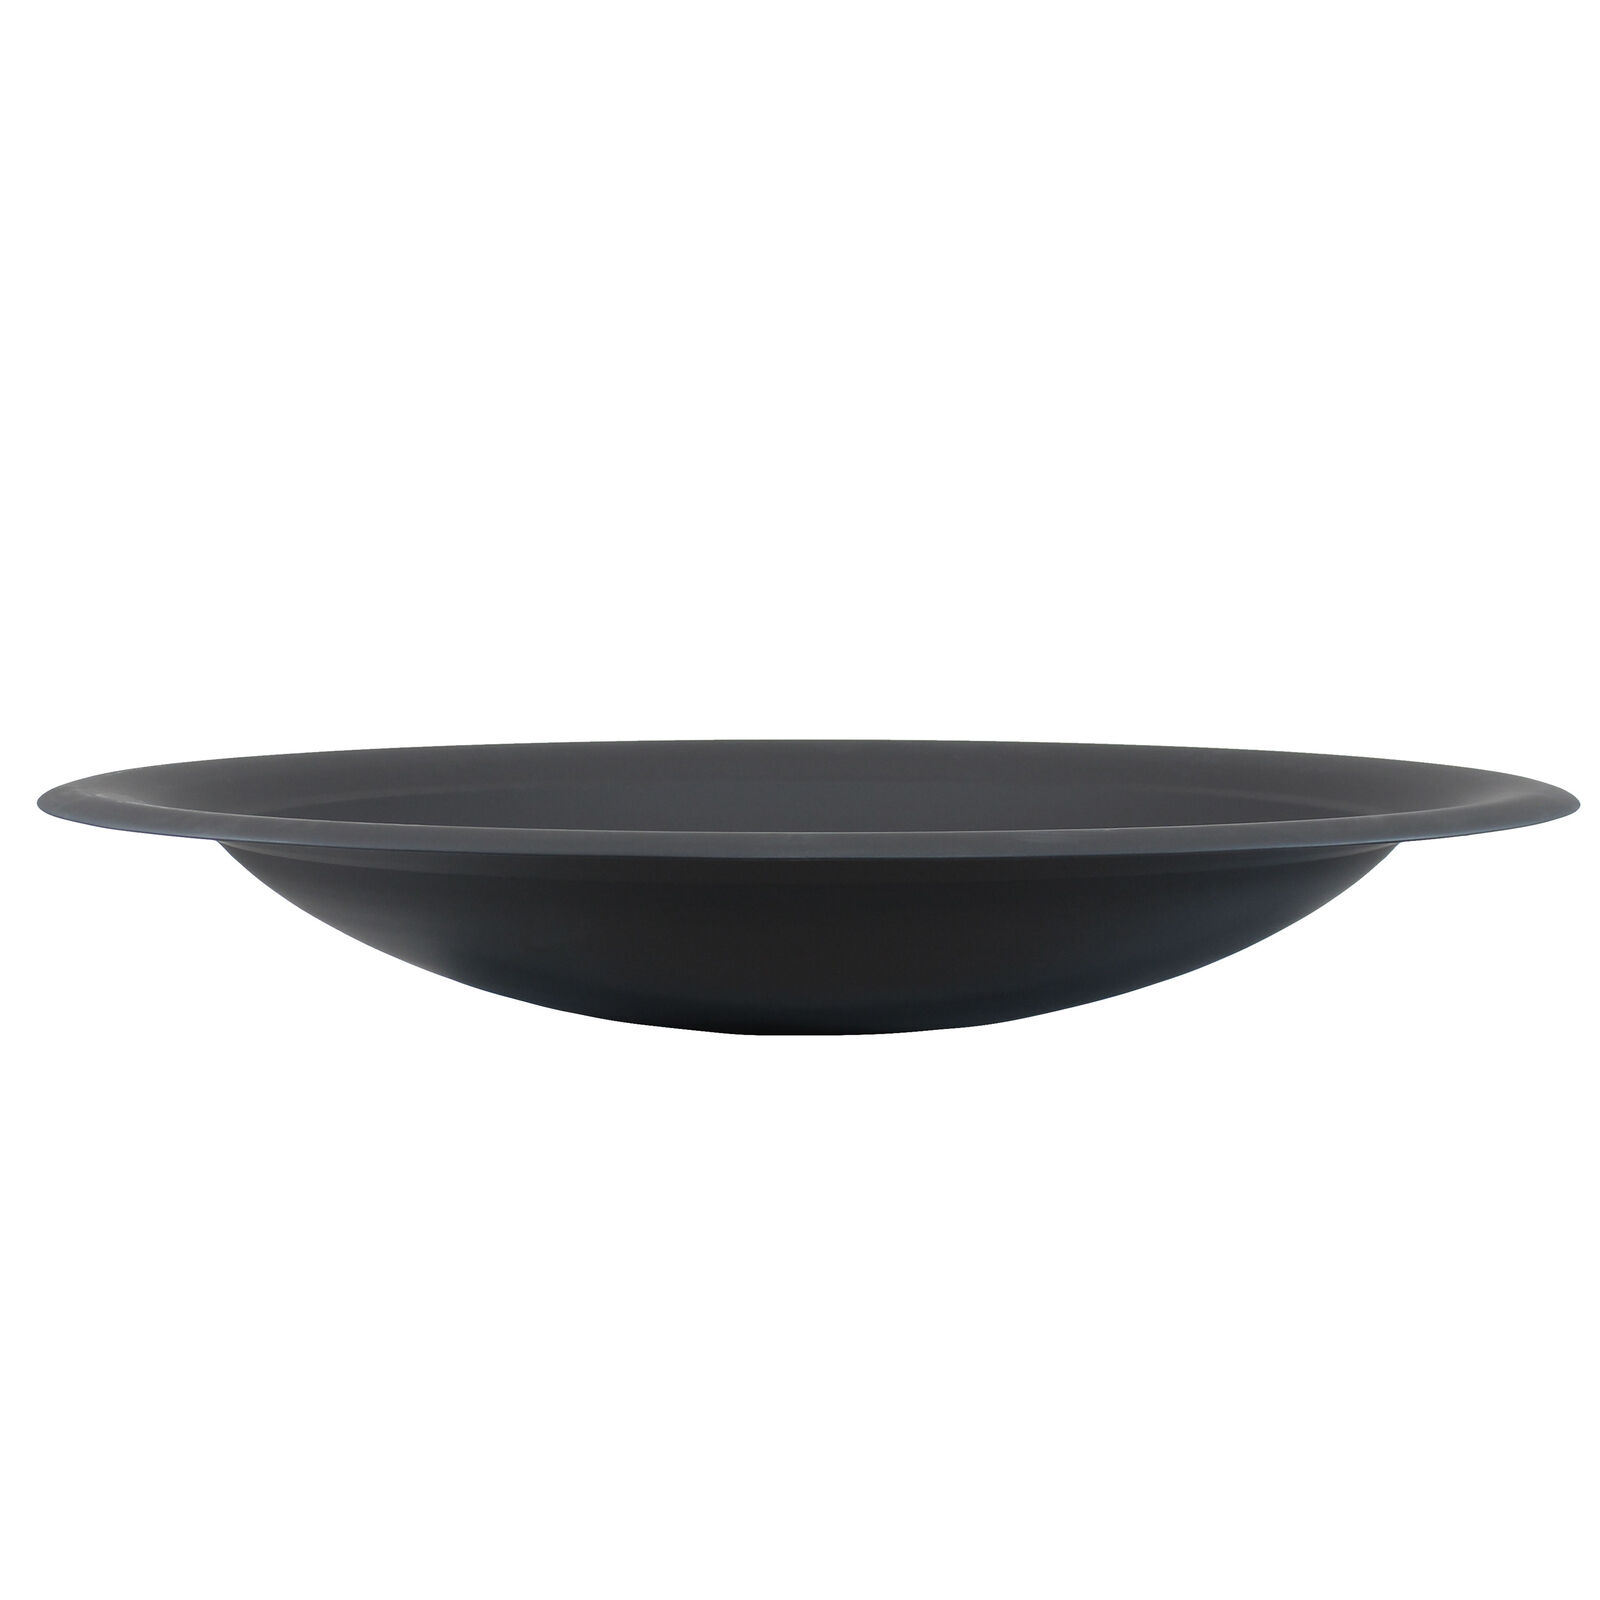 39 in Classic Elegance Steel Replacement Fire Pit Bowl - Black by Sunnydaze